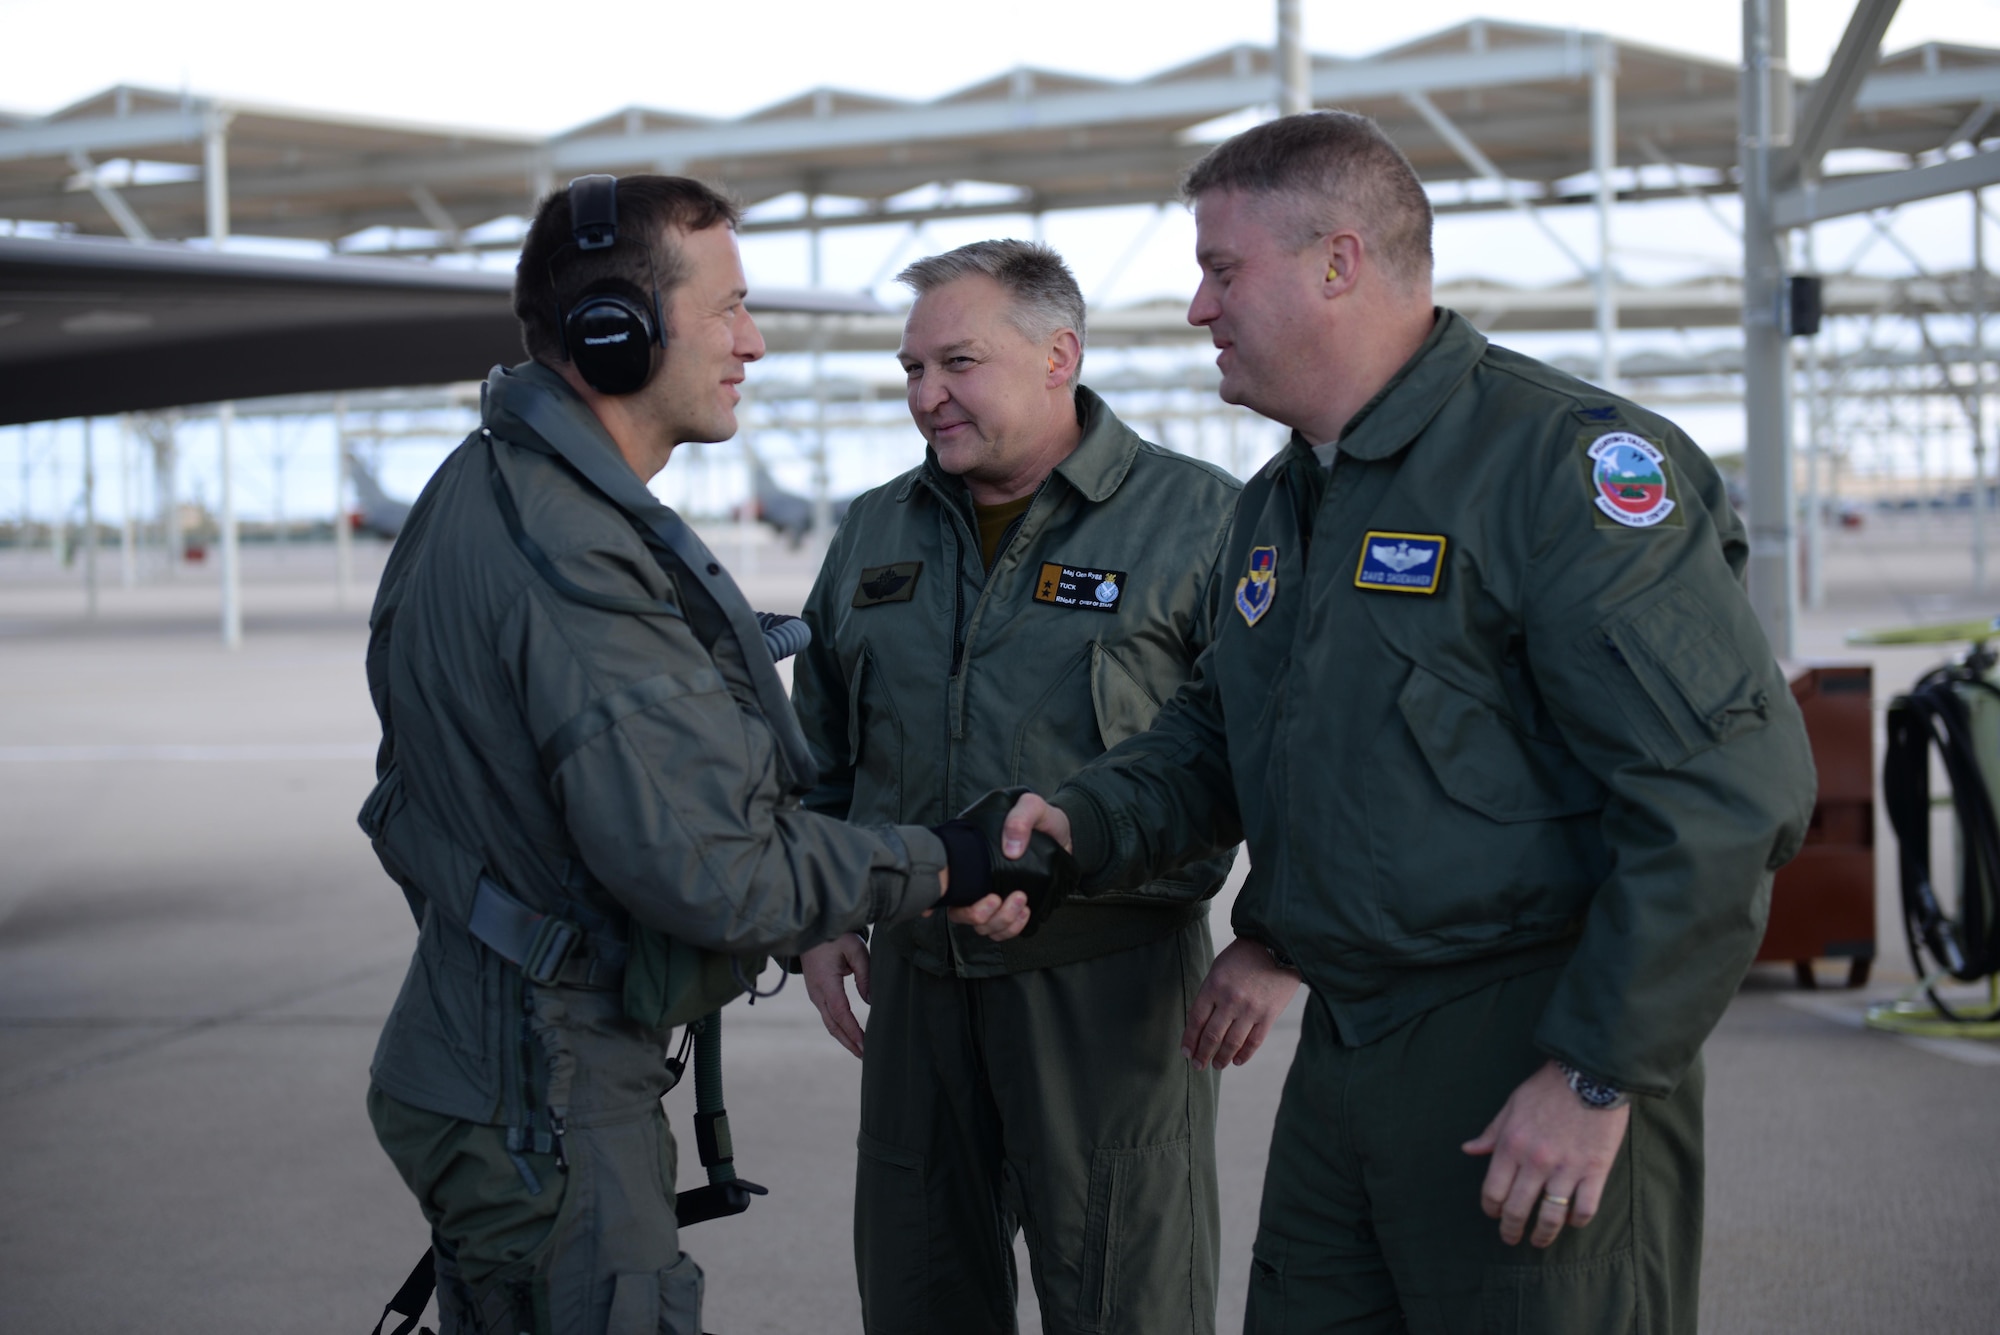 Royal Norwegian Air Force Maj. Morten Hanche, a 62nd Fighter Squadron student pilot, shakes the hand of Col. David Shoemaker, the 56th Fighter Wing vice commander, in front of Maj. Gen. Per-Egil Rygg, the Royal Norwegian Air Force chief of staff, after successfully completing a sortie in a Norwegian F-35 Lightning II Dec. 14, 2015, at Luke Air Force Base, Ariz. Hanche is the first Norwegian to fly an F-35, and is now the first Norwegian to have piloted a Norwegian-specific F-35. (U.S. Air Force photo/Airman 1st Class Ridge Shan)